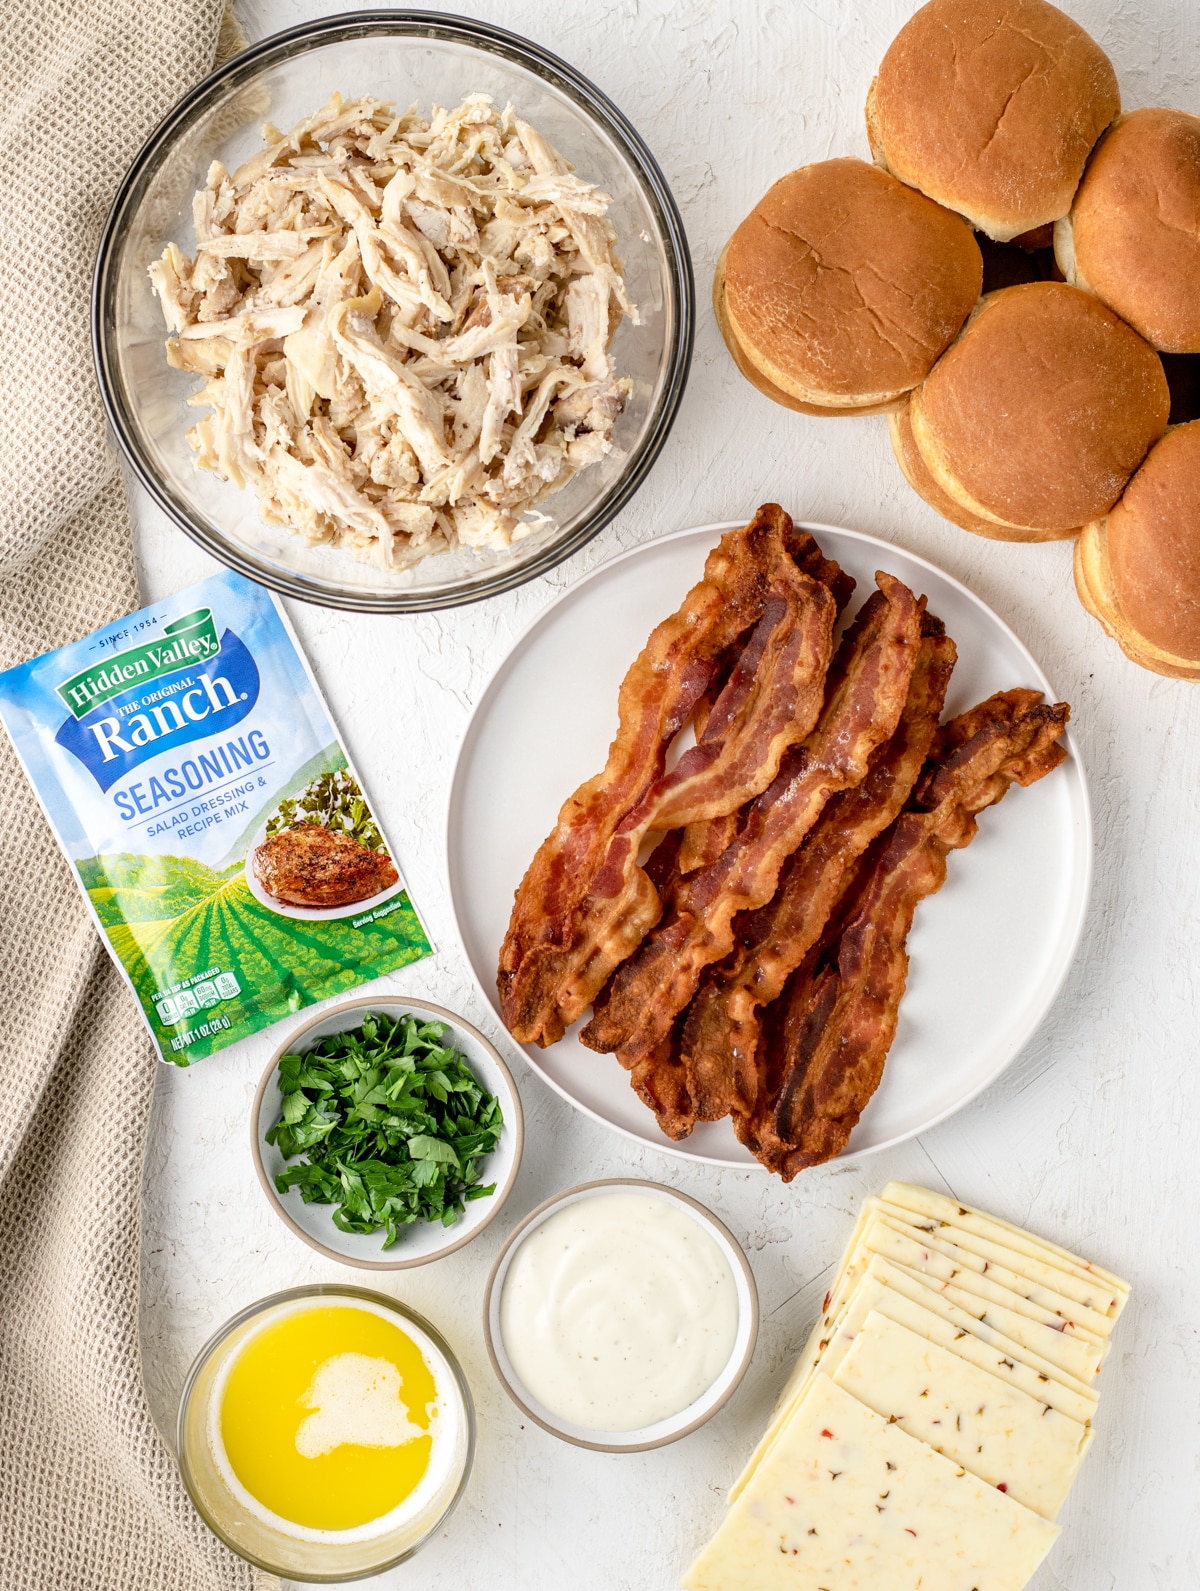 Ingredients Needed. Slider buns, shredded chicken, cooked bacon, pepper jack cheese, parsley, Ranch dressing, Ranch seasoning packet and butter.